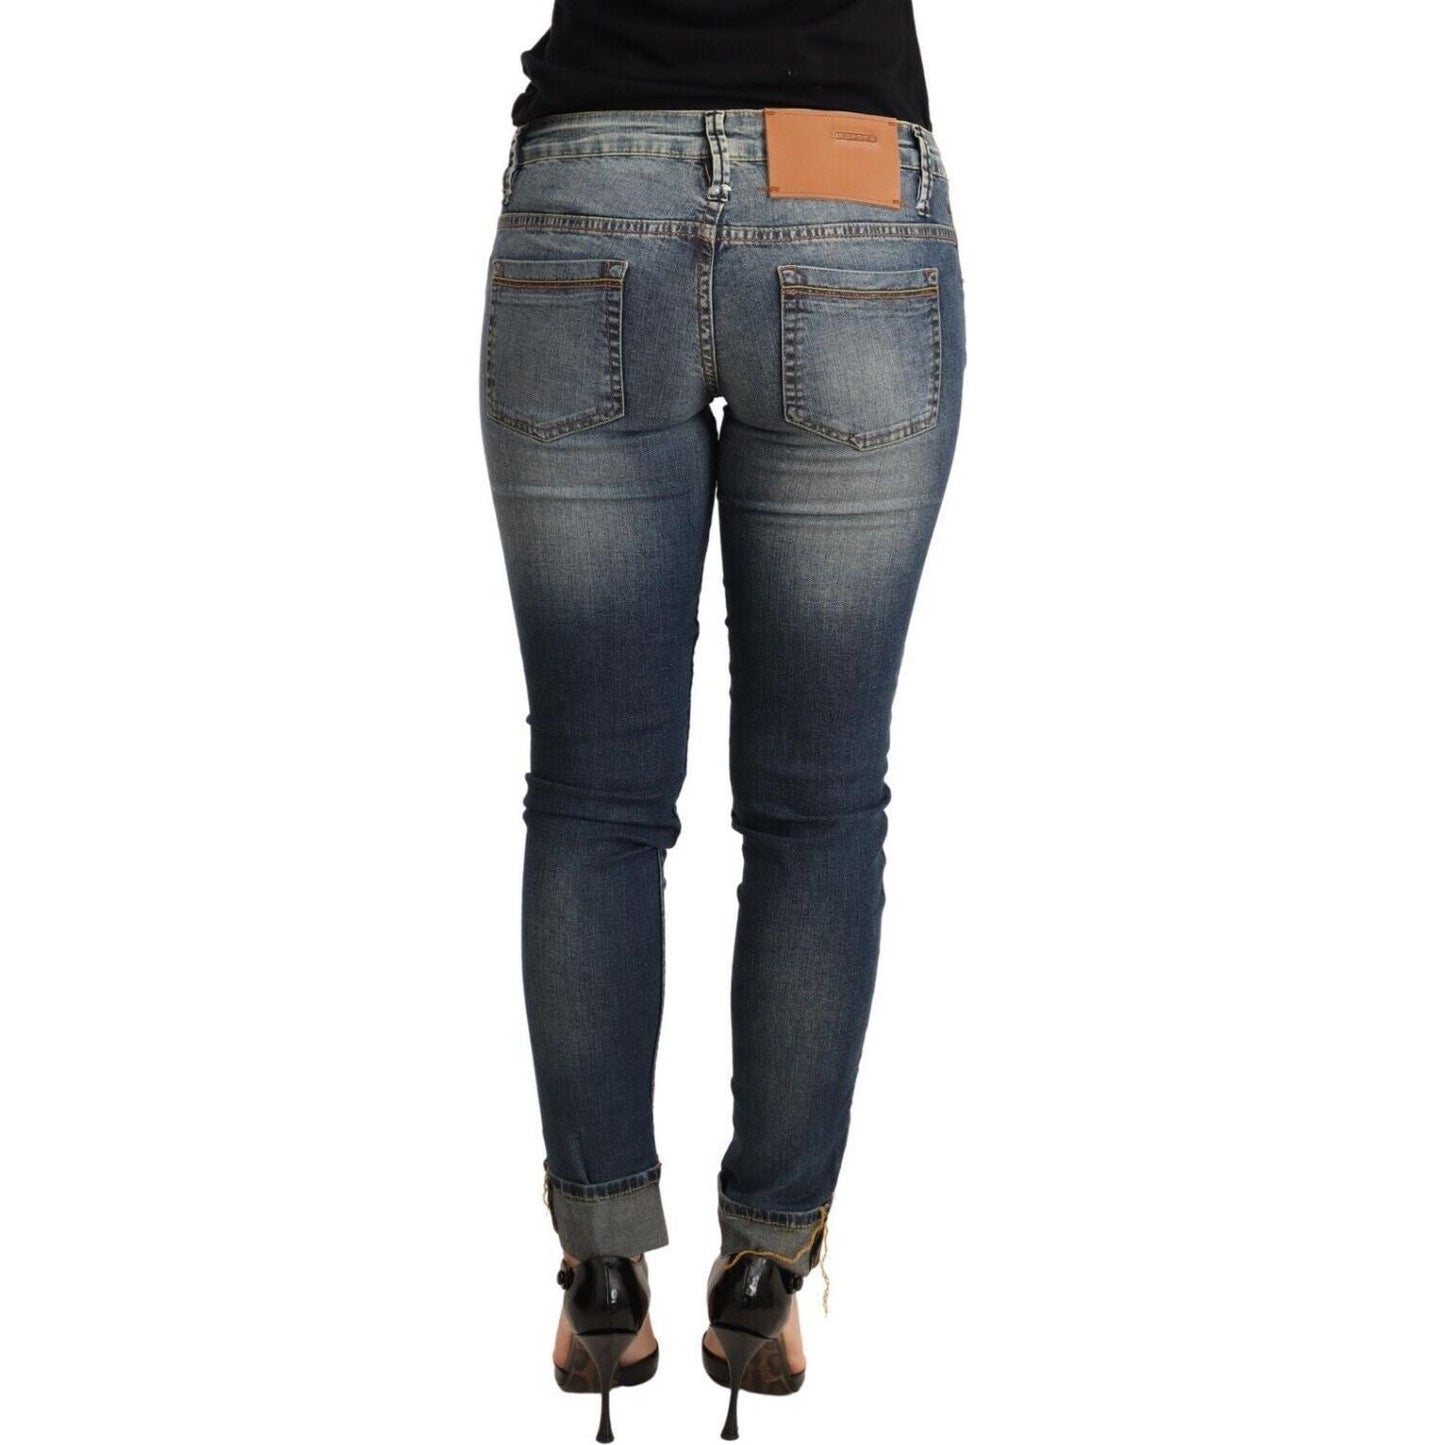 Acht Chic Blue Washed Skinny Denim Jeans & Pants blue-washed-cotton-low-waist-skinny-denim-women-trouser-jeans